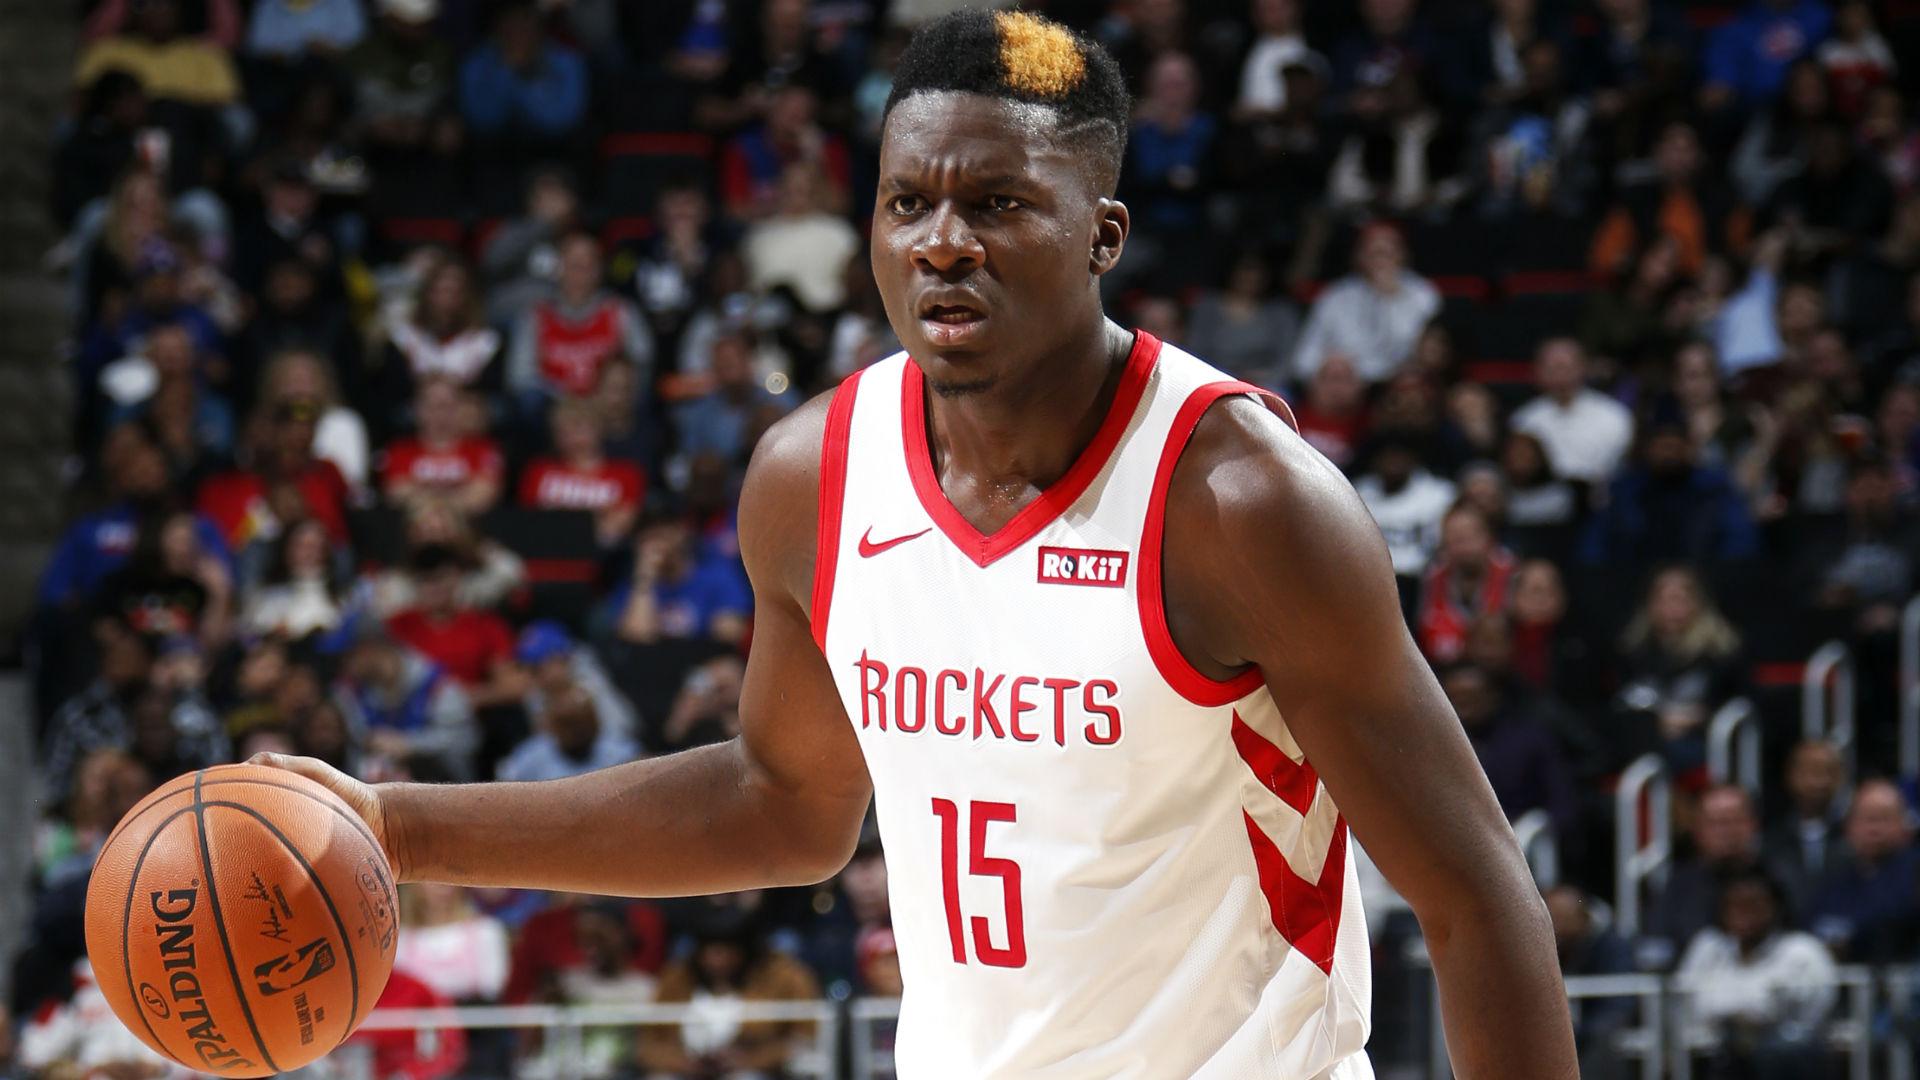 Report: Rockets Centre Clint Capela To Miss 4 6 Weeks With Thumb